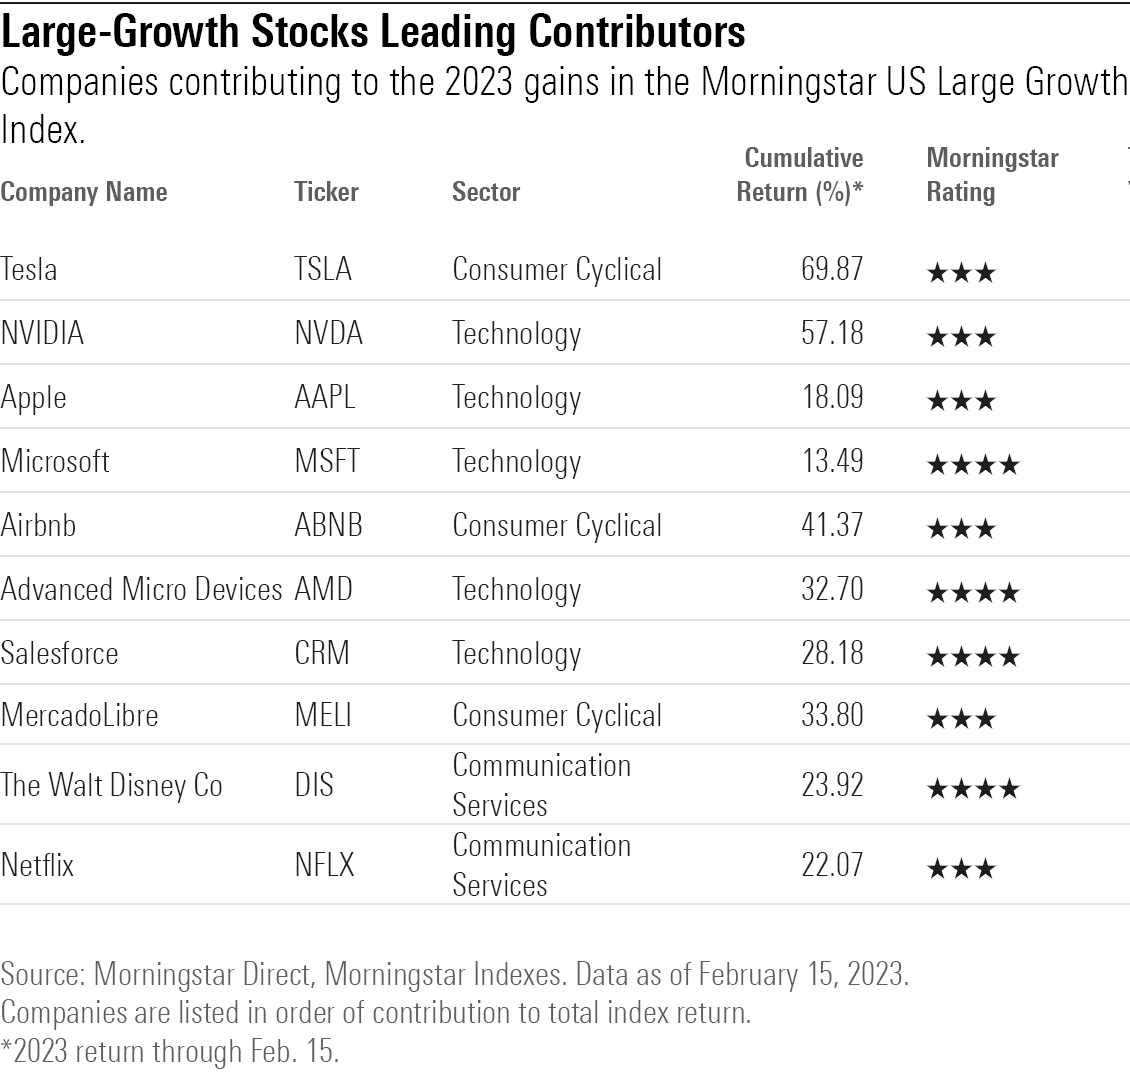 list of top contributing stocks in the Morningstar US Large Growth Index.